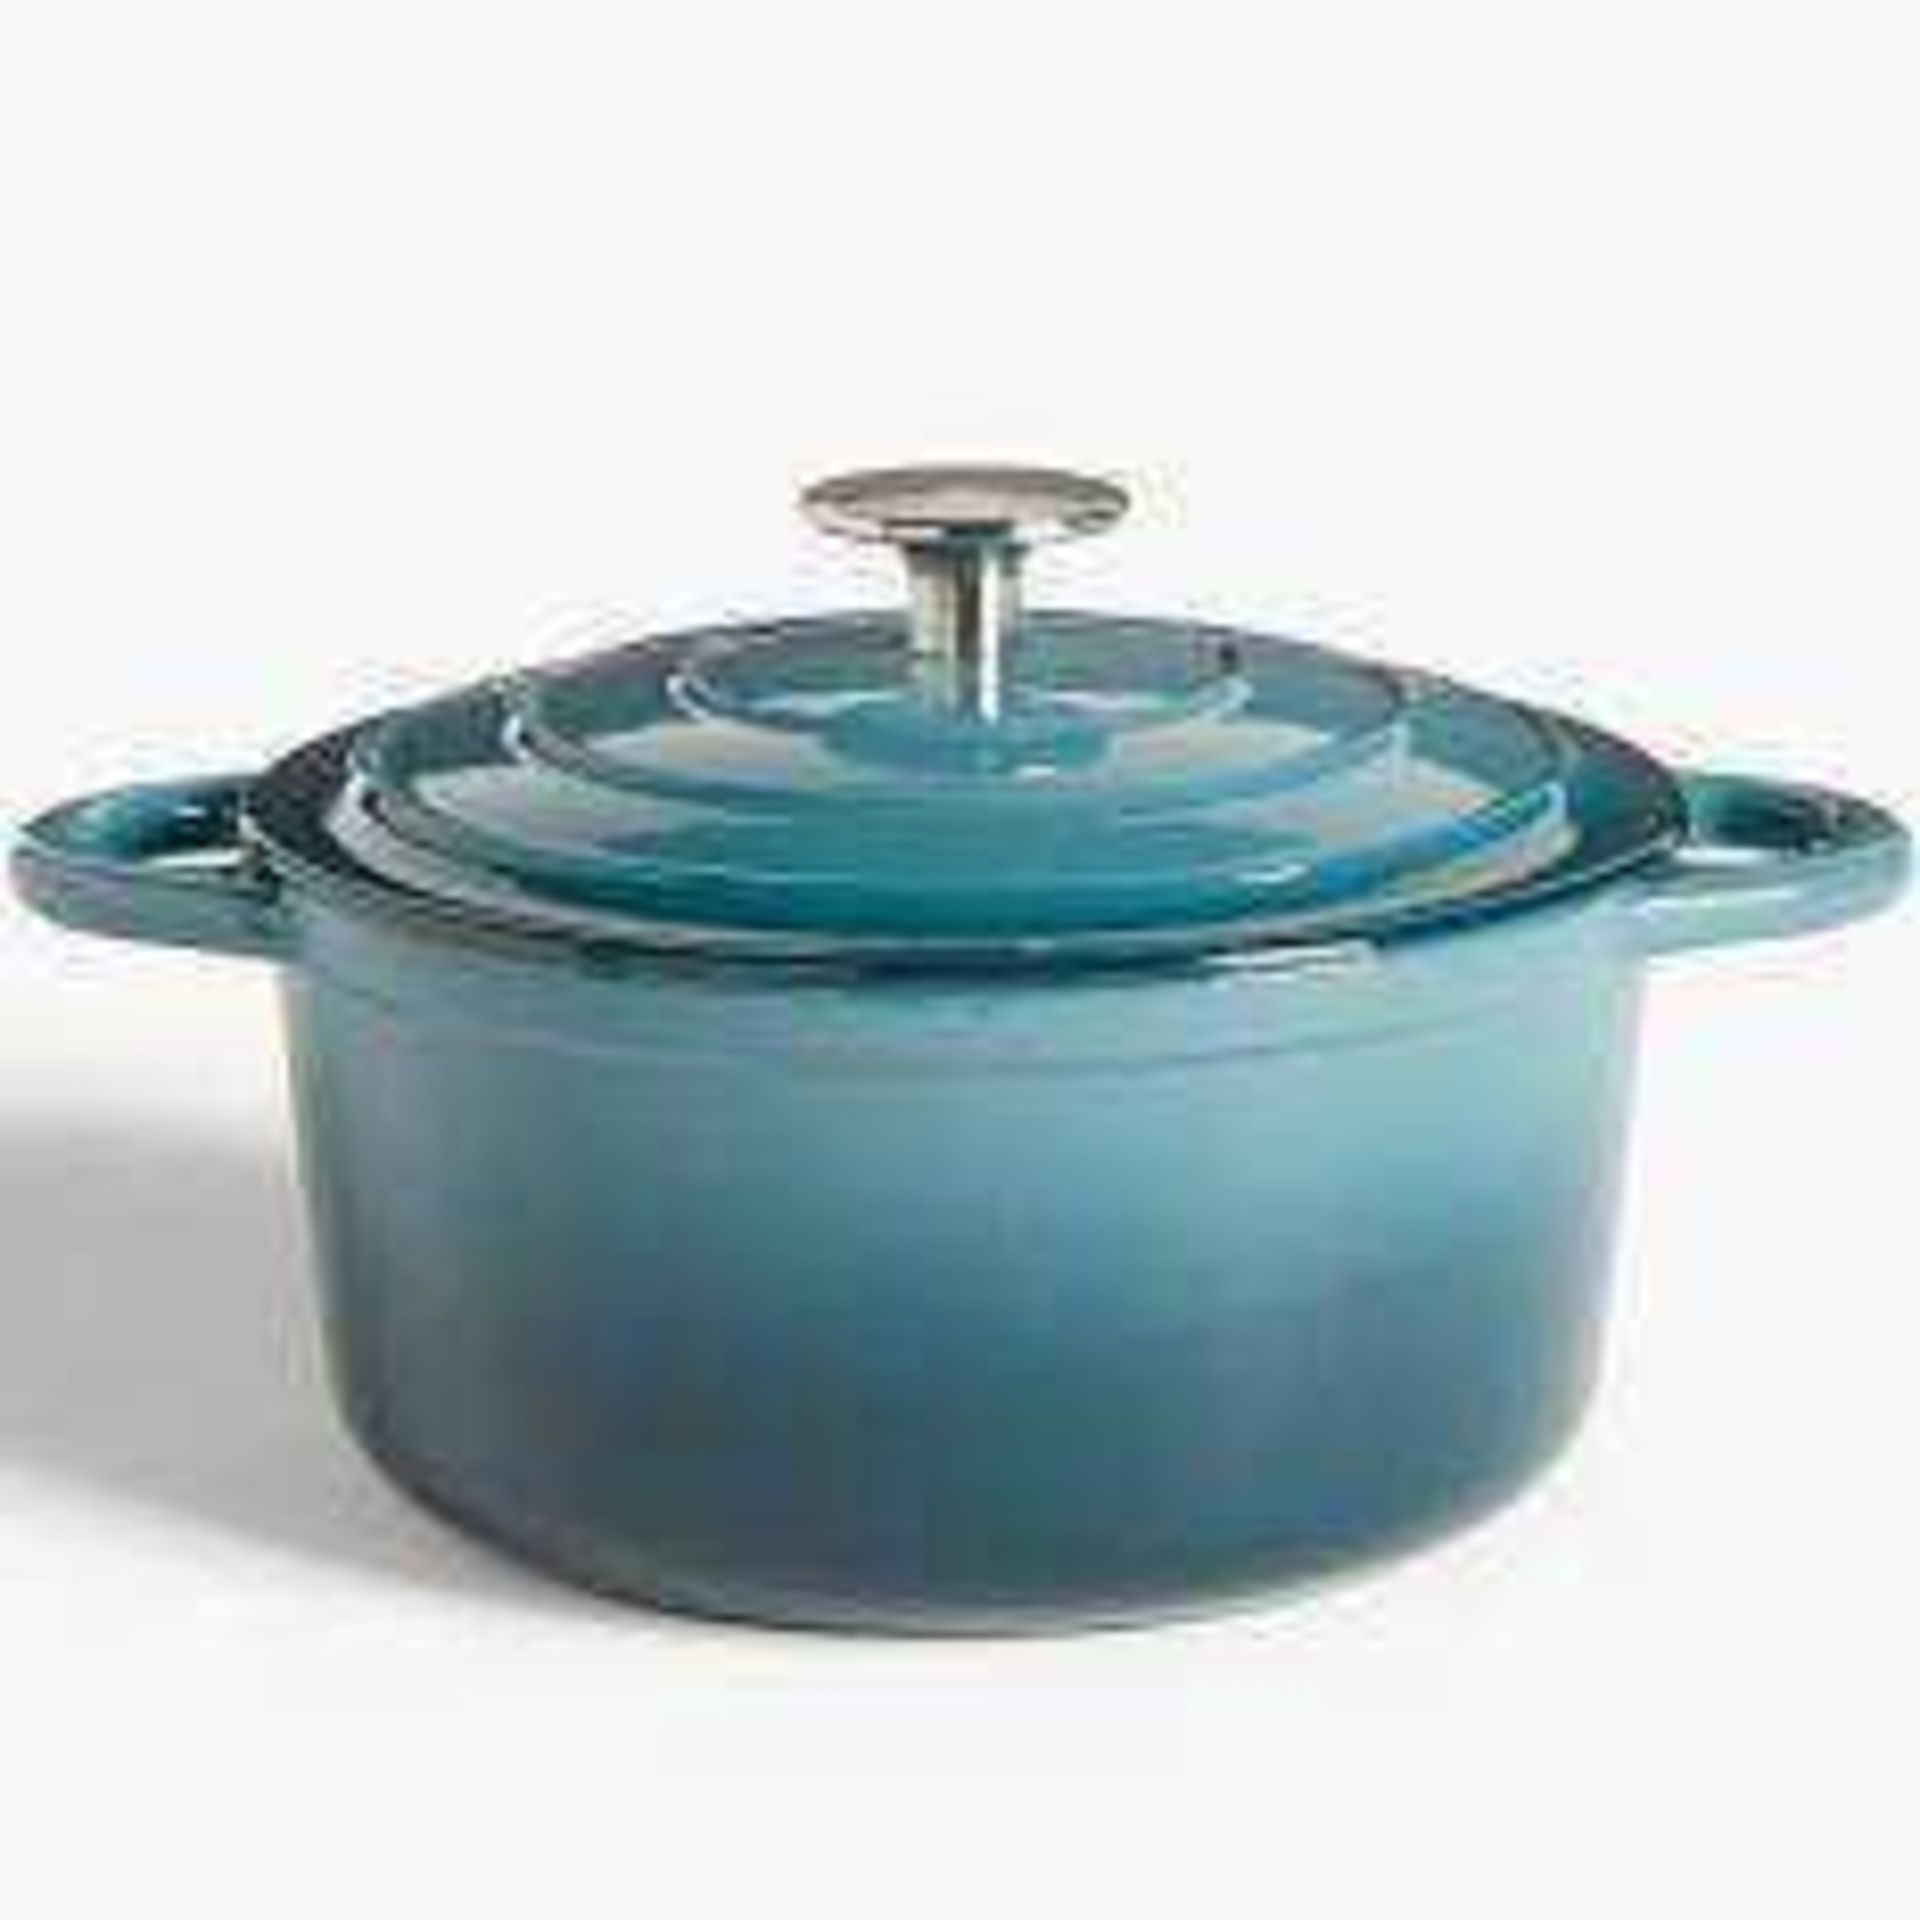 Combined RRP £110 Not Contain Assorted John Lewis Casserole Dishes To Include Boxed 24Cm Cast Iron